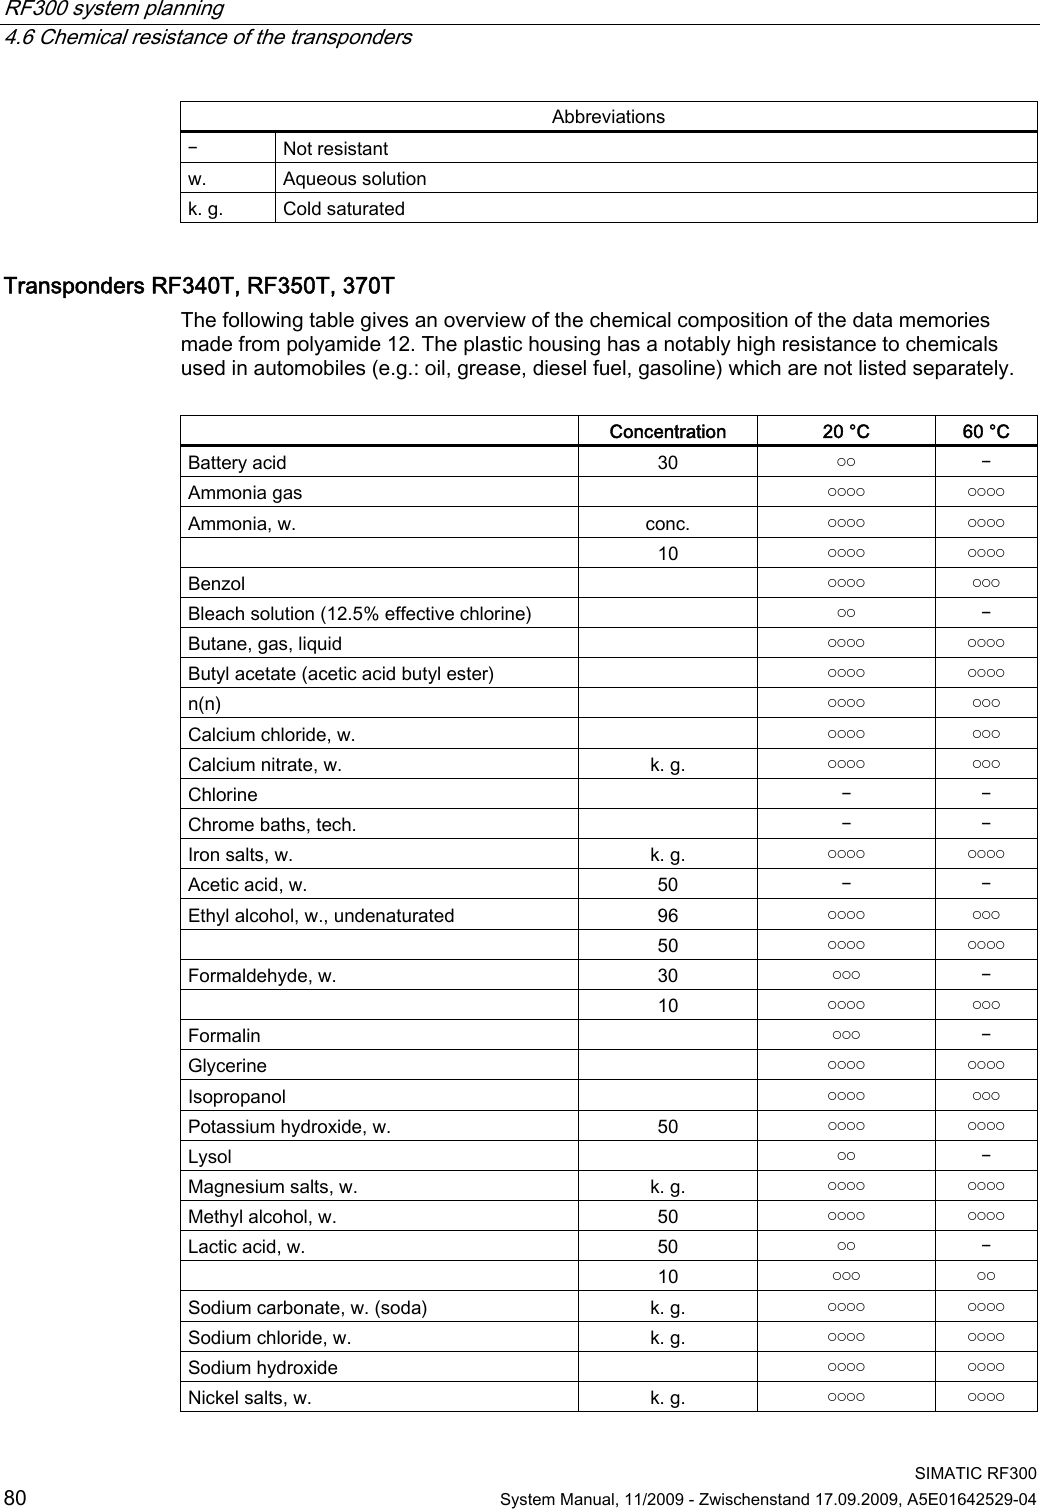 RF300 system planning   4.6 Chemical resistance of the transponders  SIMATIC RF300 80  System Manual, 11/2009 - Zwischenstand 17.09.2009, A5E01642529-04 Abbreviations ￚ  Not resistant w.  Aqueous solution k. g.  Cold saturated Transponders RF340T, RF350T, 370T The following table gives an overview of the chemical composition of the data memories made from polyamide 12. The plastic housing has a notably high resistance to chemicals used in automobiles (e.g.: oil, grease, diesel fuel, gasoline) which are not listed separately.    Concentration  20 °C  60 °C Battery acid  30  ￮￮  ￚ Ammonia gas    ￮￮￮￮  ￮￮￮￮ Ammonia, w.  conc.  ￮￮￮￮  ￮￮￮￮   10  ￮￮￮￮  ￮￮￮￮ Benzol    ￮￮￮￮  ￮￮￮ Bleach solution (12.5% effective chlorine)    ￮￮  ￚ Butane, gas, liquid    ￮￮￮￮  ￮￮￮￮ Butyl acetate (acetic acid butyl ester)    ￮￮￮￮  ￮￮￮￮ n(n)    ￮￮￮￮  ￮￮￮ Calcium chloride, w.    ￮￮￮￮  ￮￮￮ Calcium nitrate, w.  k. g.  ￮￮￮￮  ￮￮￮ Chlorine    ￚ  ￚ Chrome baths, tech.    ￚ  ￚ Iron salts, w.  k. g.  ￮￮￮￮  ￮￮￮￮ Acetic acid, w.  50  ￚ  ￚ Ethyl alcohol, w., undenaturated  96  ￮￮￮￮  ￮￮￮   50  ￮￮￮￮  ￮￮￮￮ Formaldehyde, w.  30  ￮￮￮  ￚ   10  ￮￮￮￮  ￮￮￮ Formalin    ￮￮￮  ￚ Glycerine    ￮￮￮￮  ￮￮￮￮ Isopropanol    ￮￮￮￮  ￮￮￮ Potassium hydroxide, w.  50  ￮￮￮￮  ￮￮￮￮ Lysol    ￮￮  ￚ Magnesium salts, w.  k. g.  ￮￮￮￮  ￮￮￮￮ Methyl alcohol, w.  50  ￮￮￮￮  ￮￮￮￮ Lactic acid, w.  50  ￮￮  ￚ   10  ￮￮￮  ￮￮ Sodium carbonate, w. (soda)  k. g.  ￮￮￮￮  ￮￮￮￮ Sodium chloride, w.  k. g.  ￮￮￮￮  ￮￮￮￮ Sodium hydroxide    ￮￮￮￮  ￮￮￮￮ Nickel salts, w.  k. g.  ￮￮￮￮  ￮￮￮￮ 